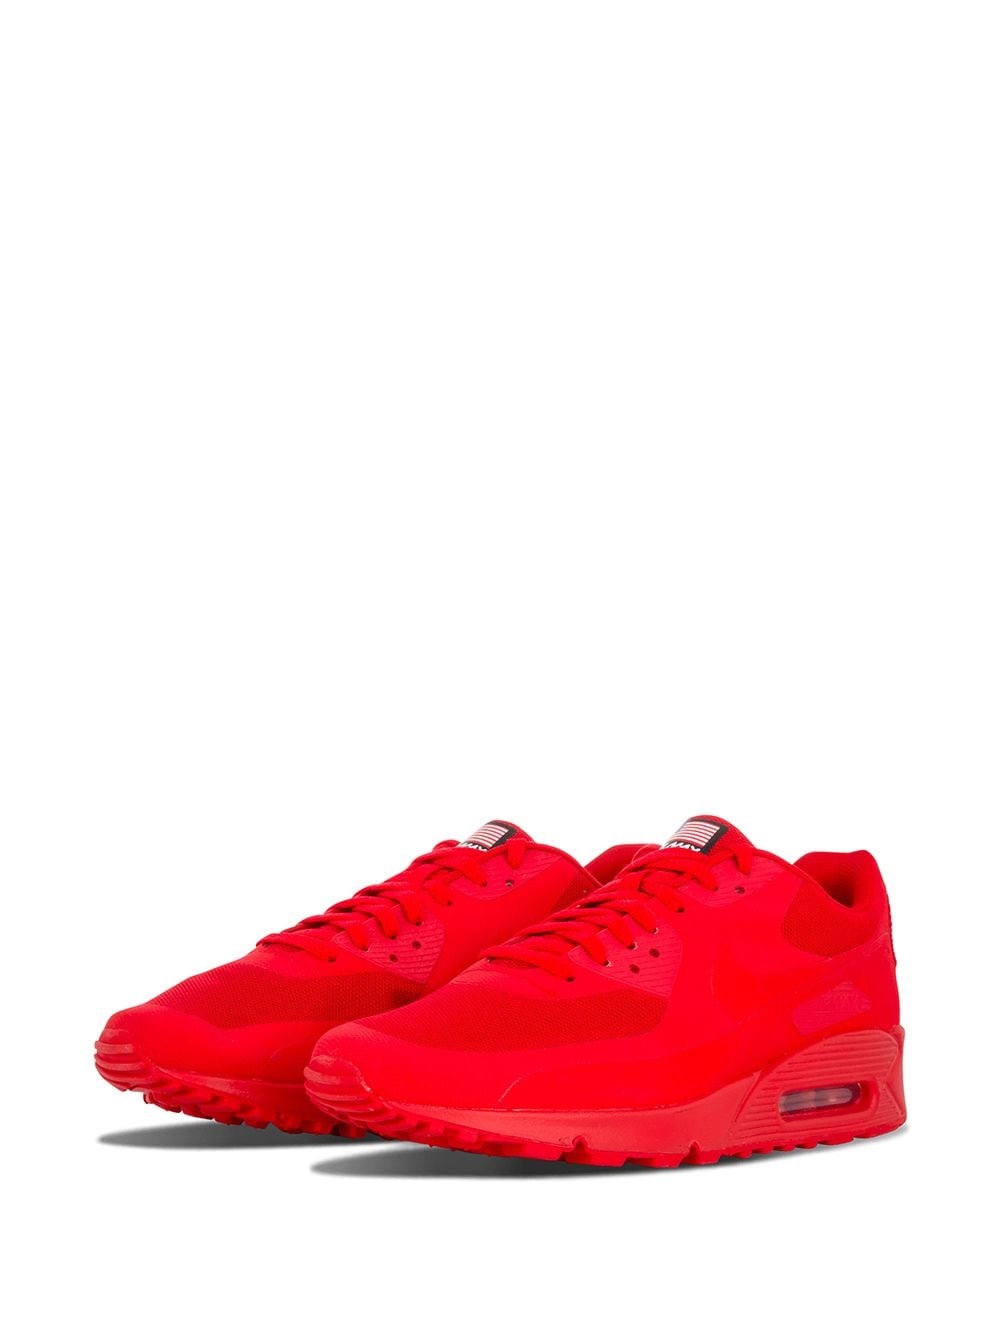 Air Max 90 Hyperfuse QS "Independence Day" sneakers - 2